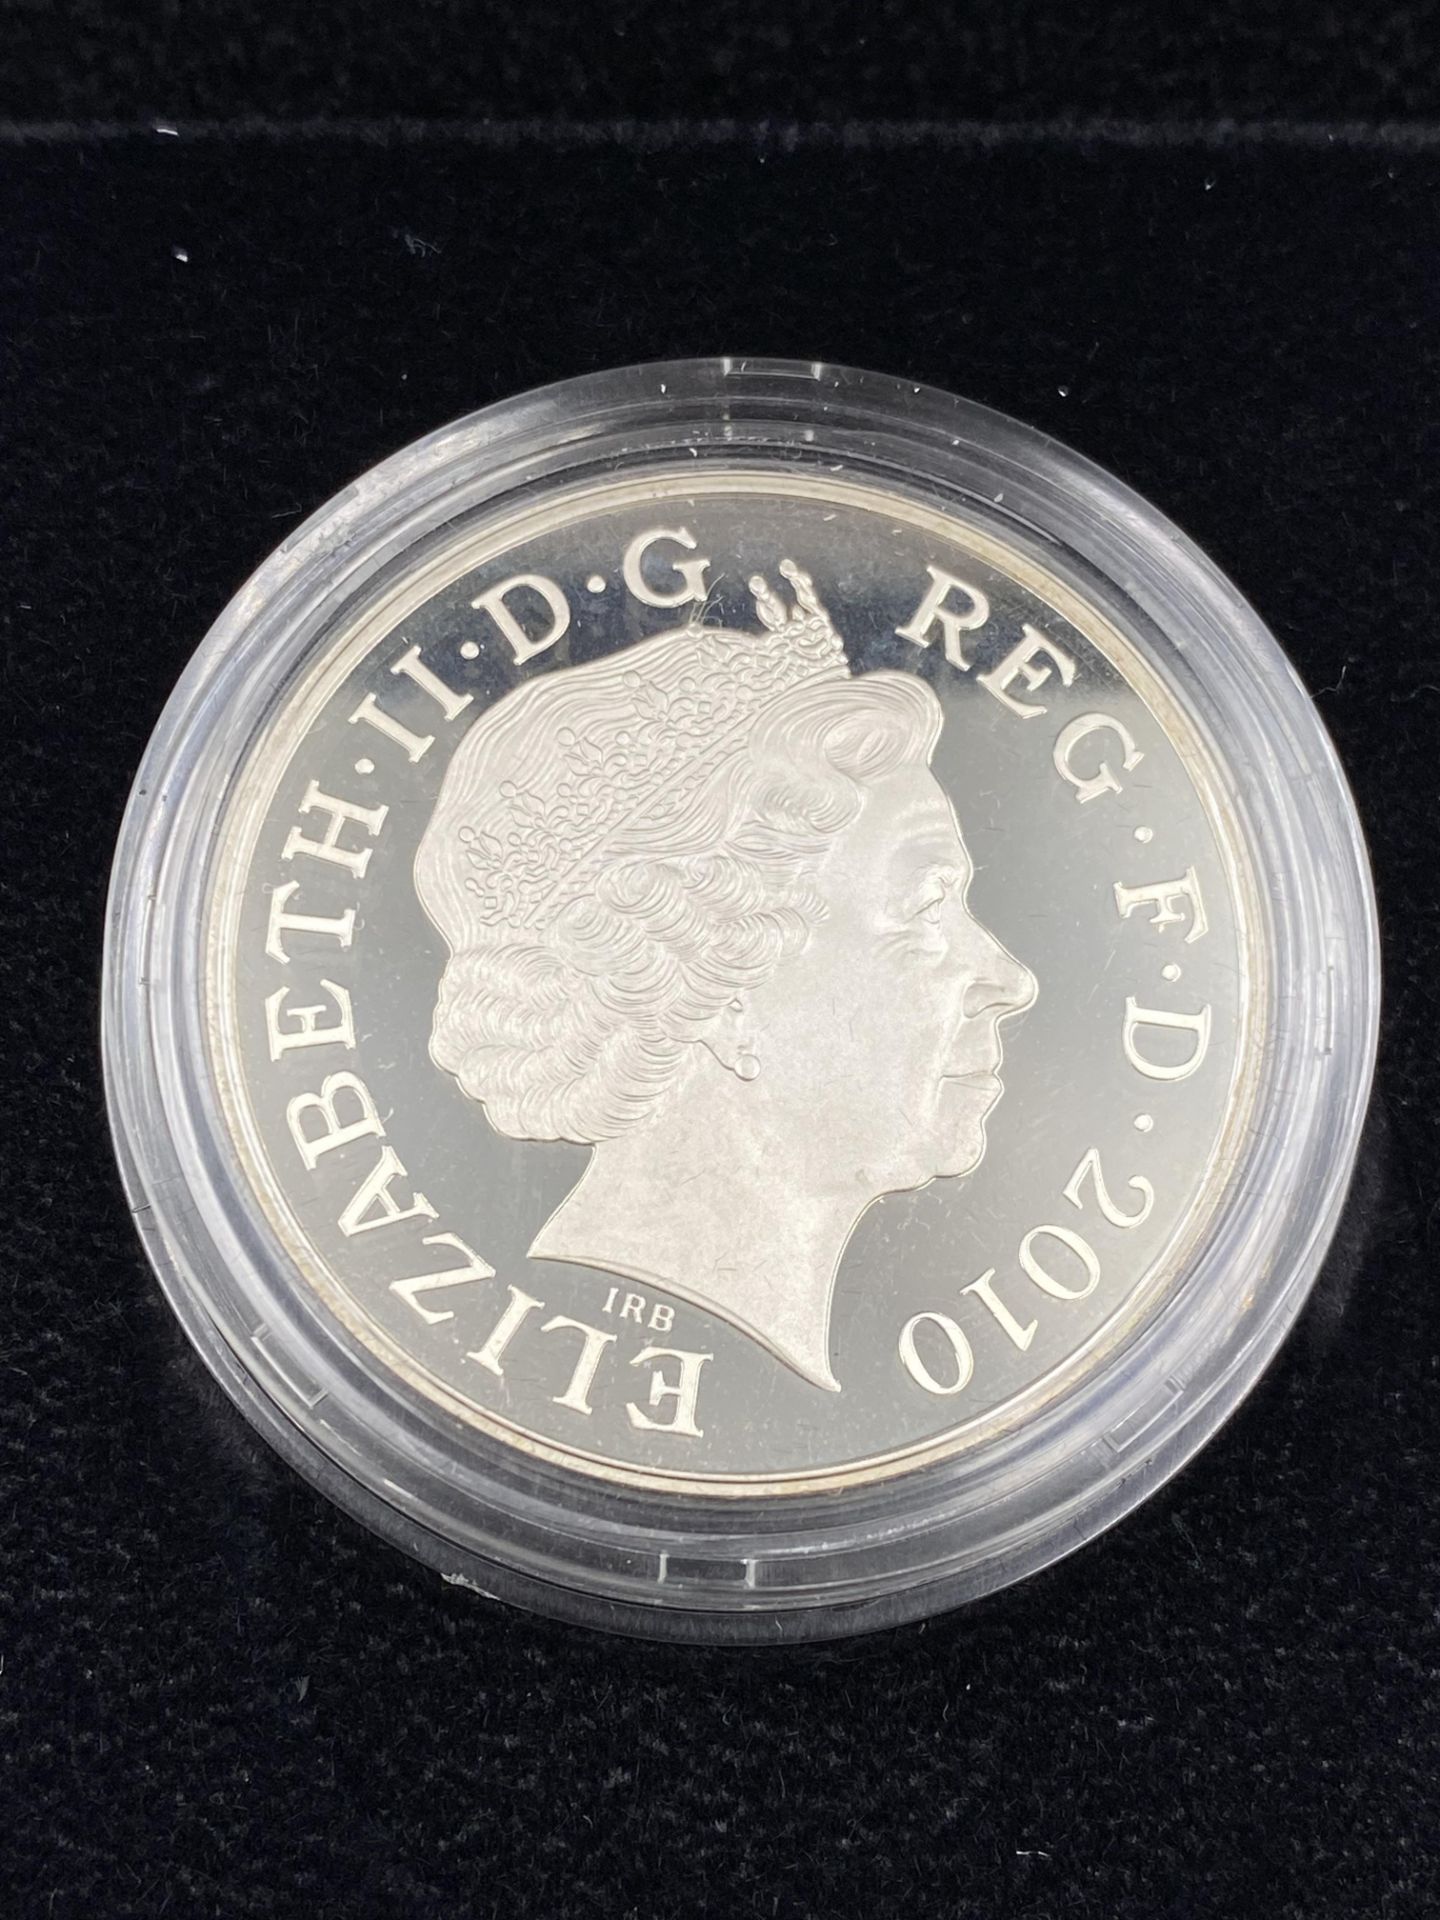 Royal Mint 2010 Restoration of the Monarchy £5 silver proof coin - Image 3 of 4